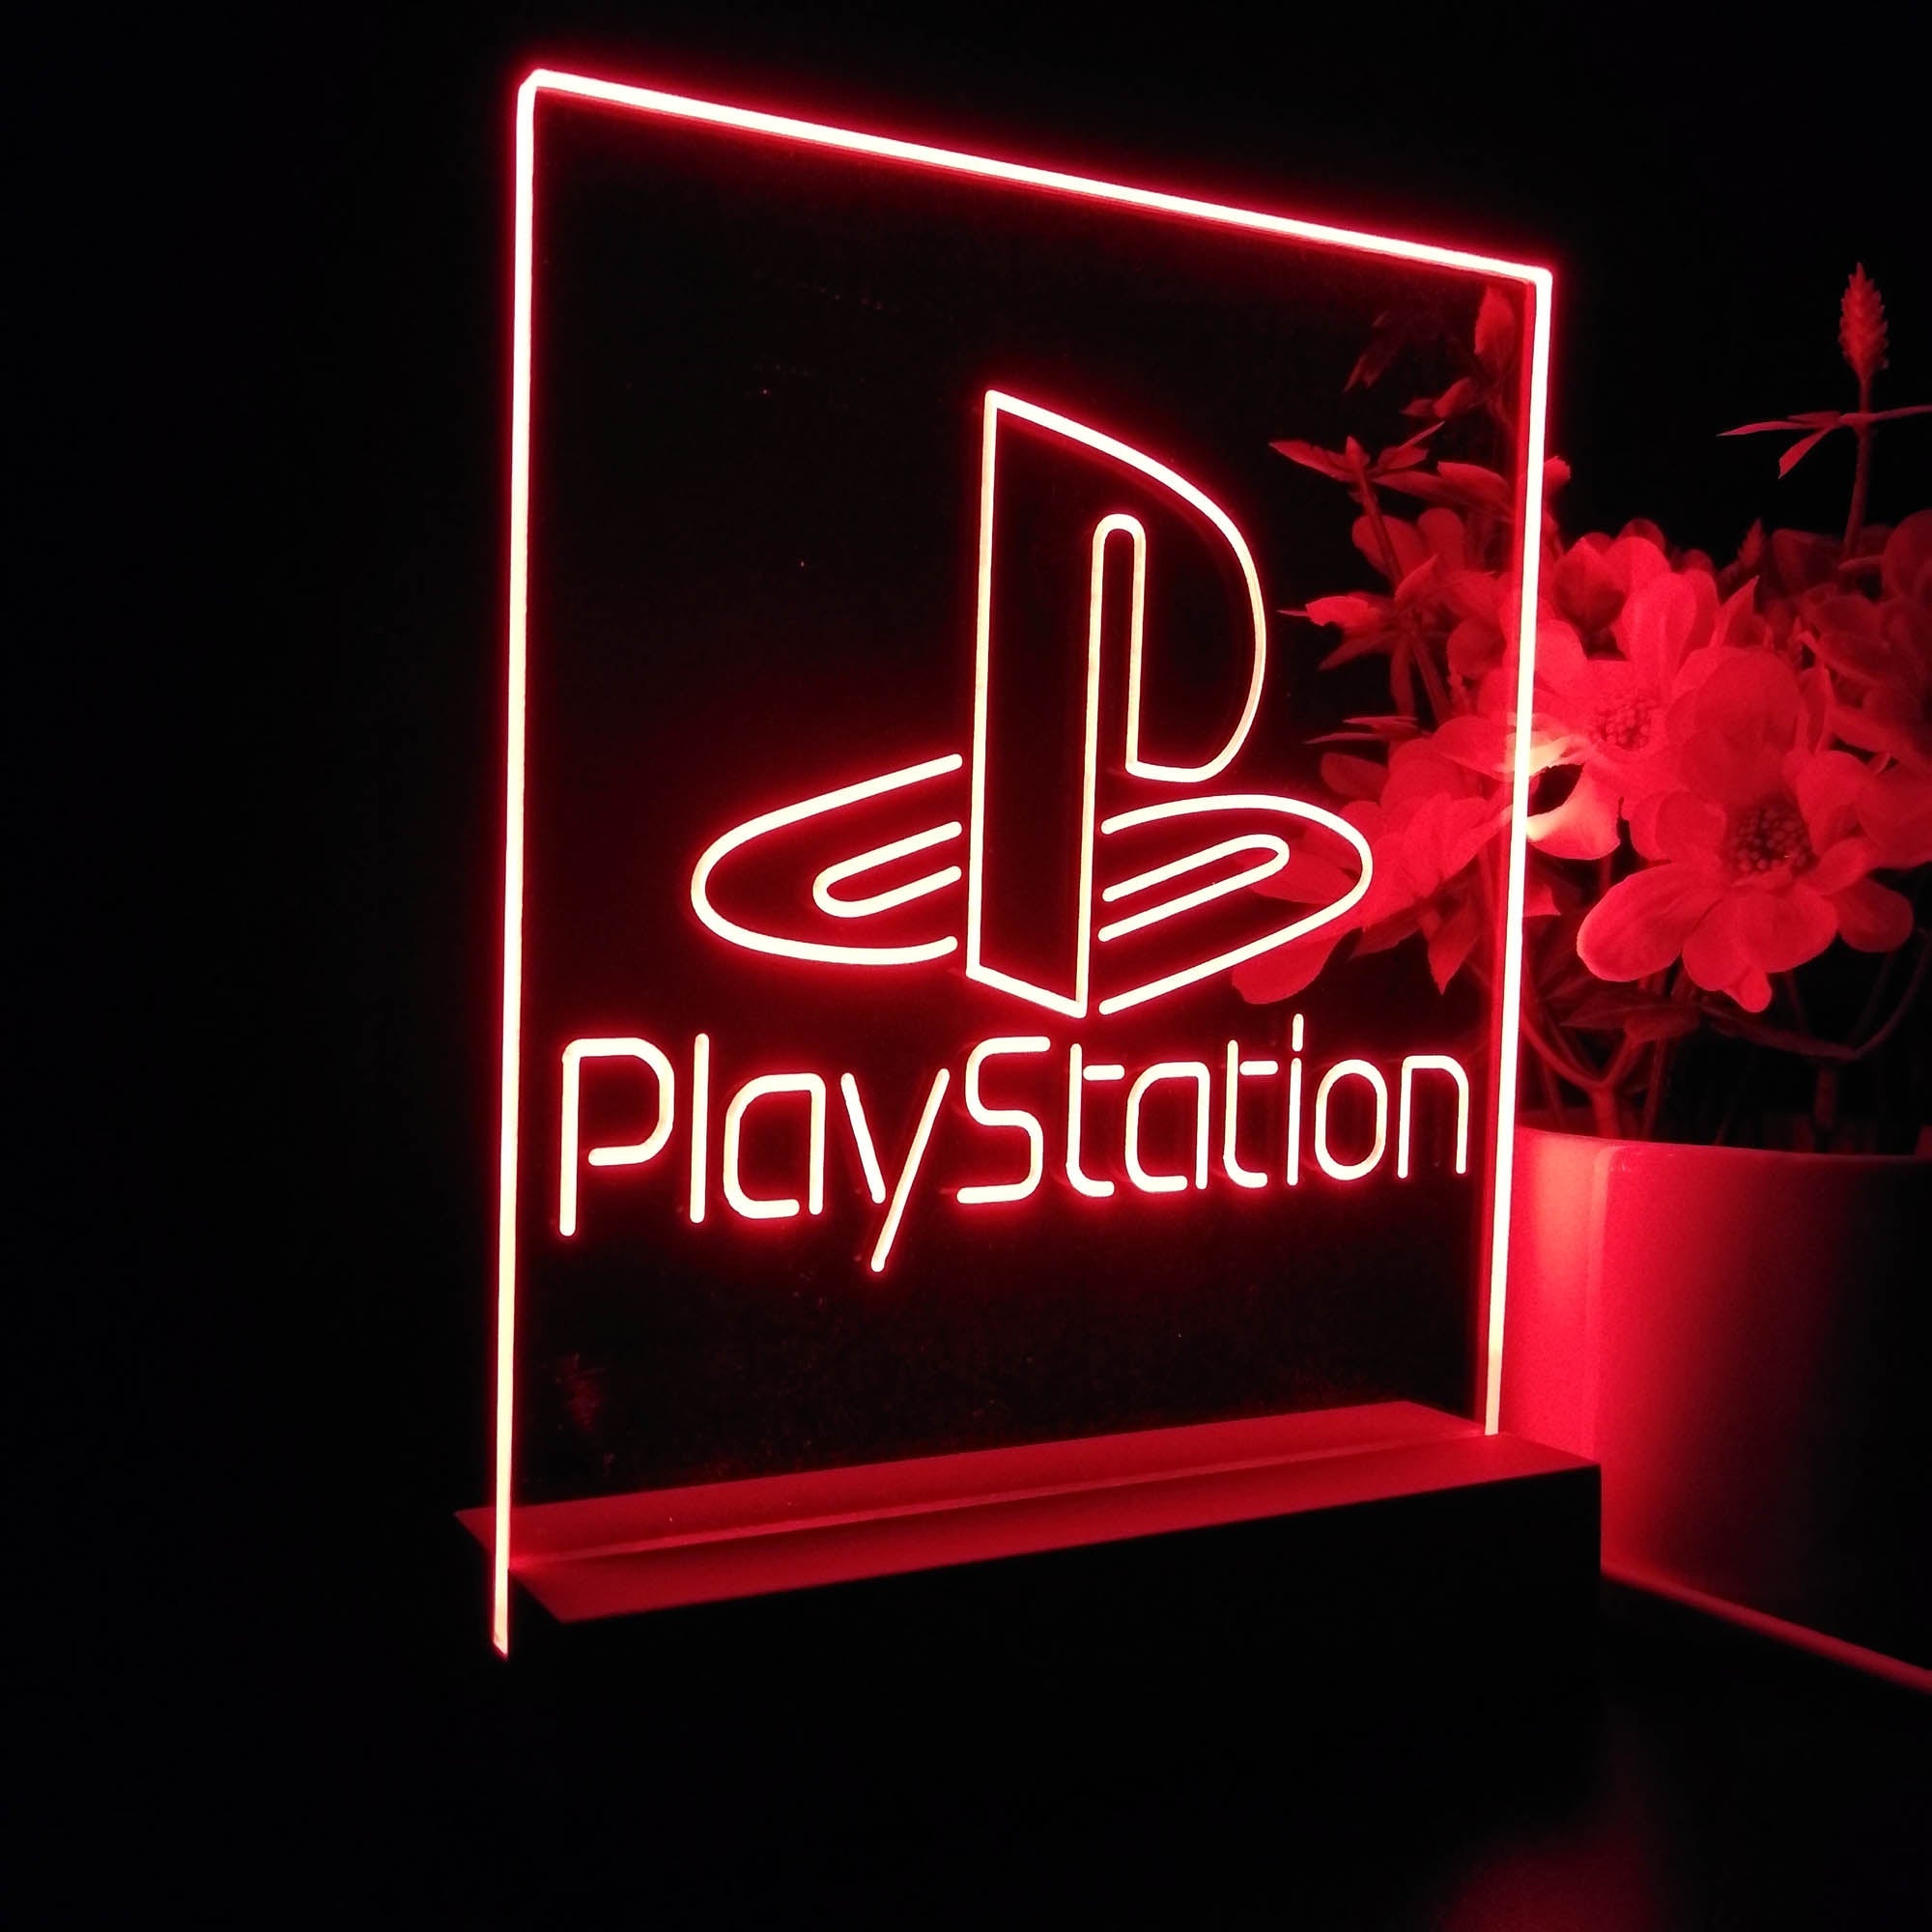 Playstation Game Room Night Light Table Top Lamp